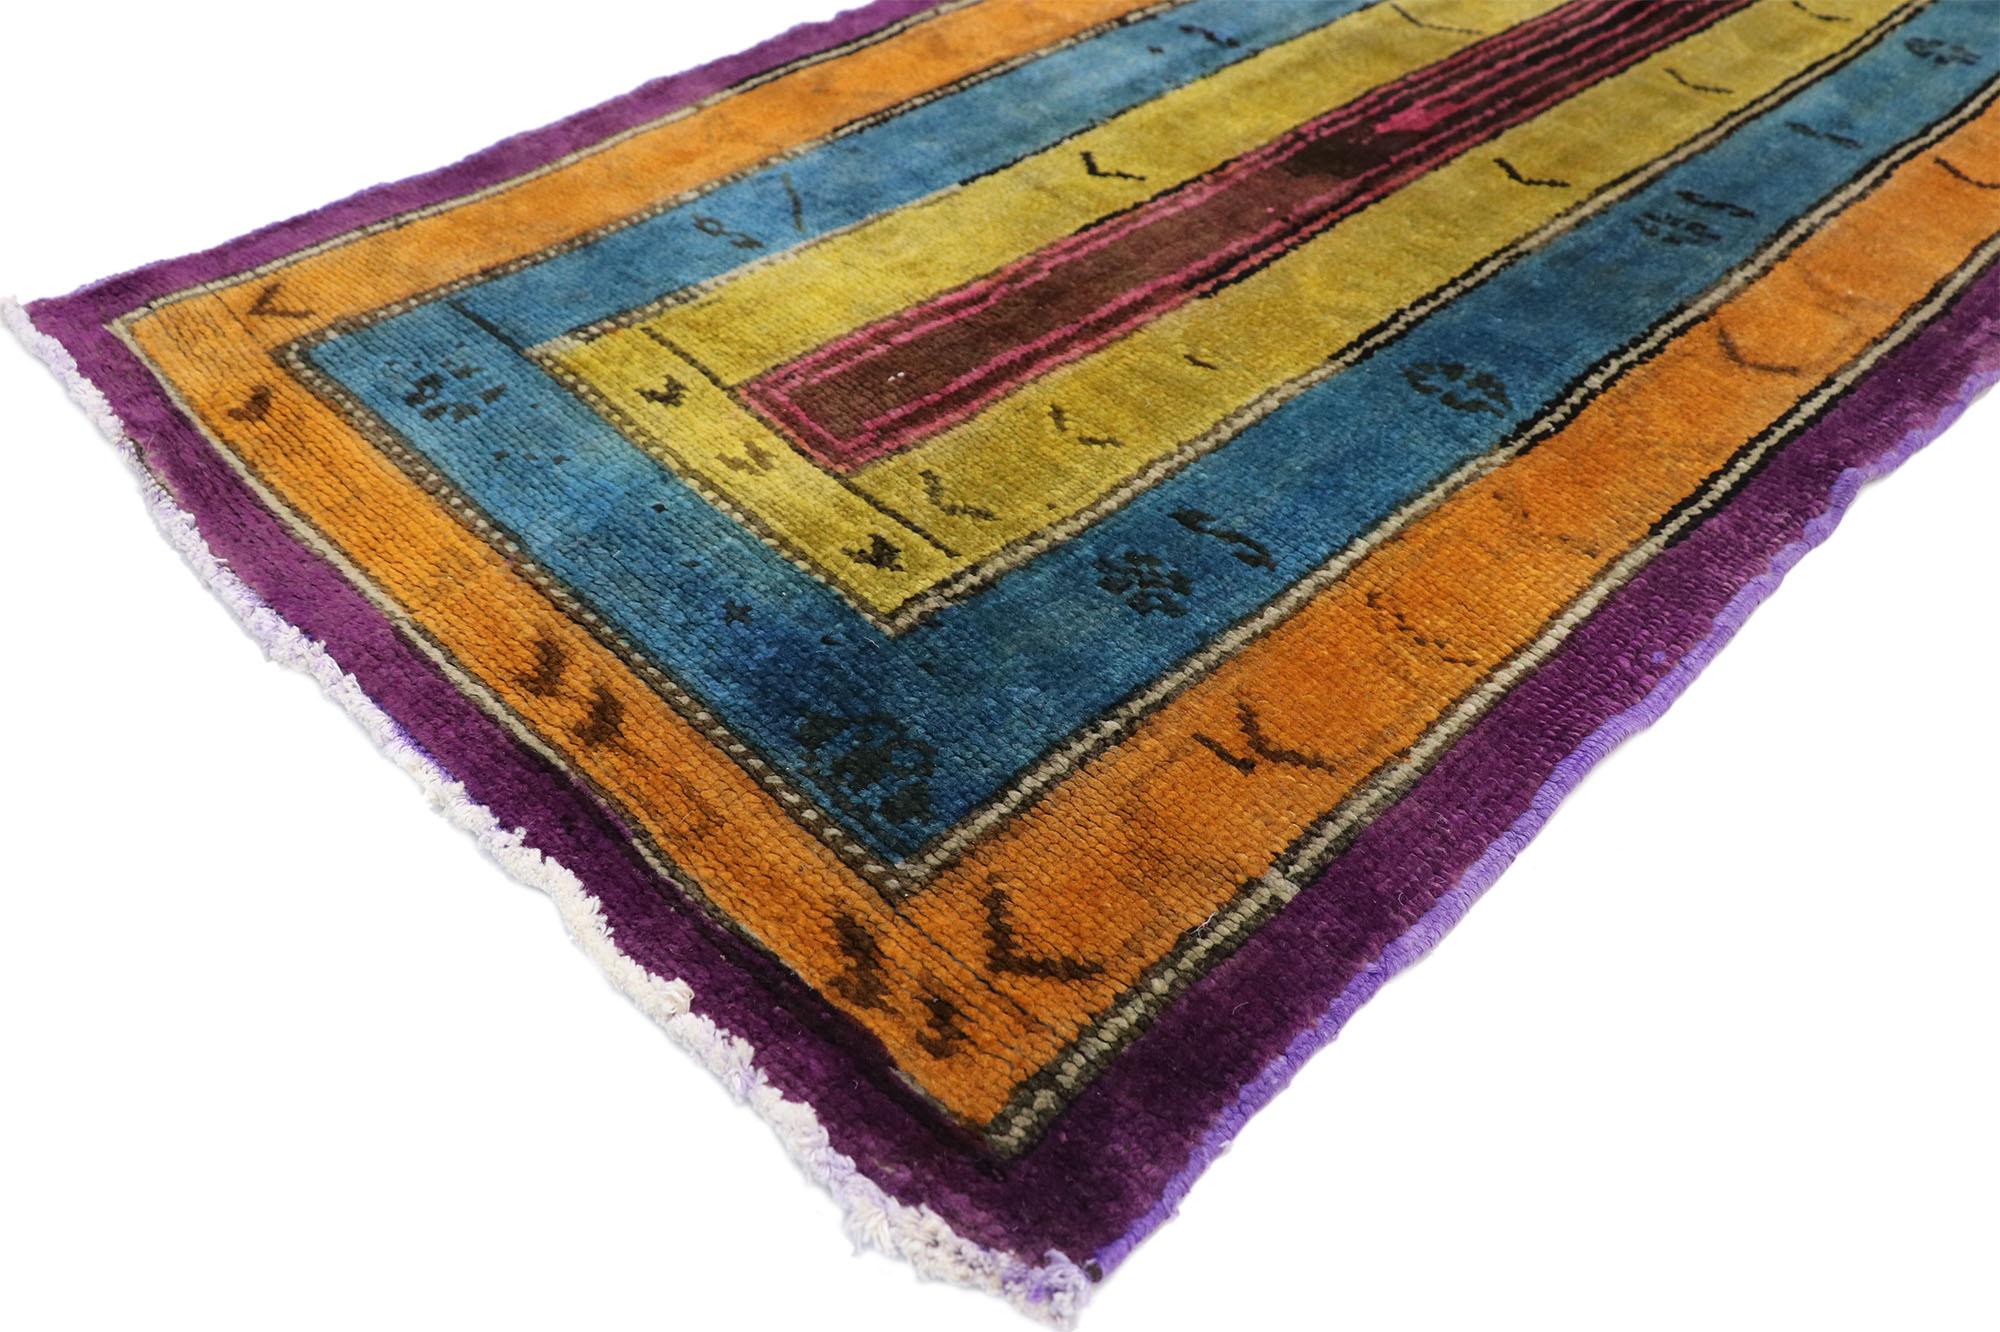 52065, vintage Turkish Oushak extra-long hallway runner with Art Deco style. This hand-knotted wool vintage Turkish Oushak runner with tribal style features a multiple border design rendered in pink, yellow, blue, orange, purple and brown. This